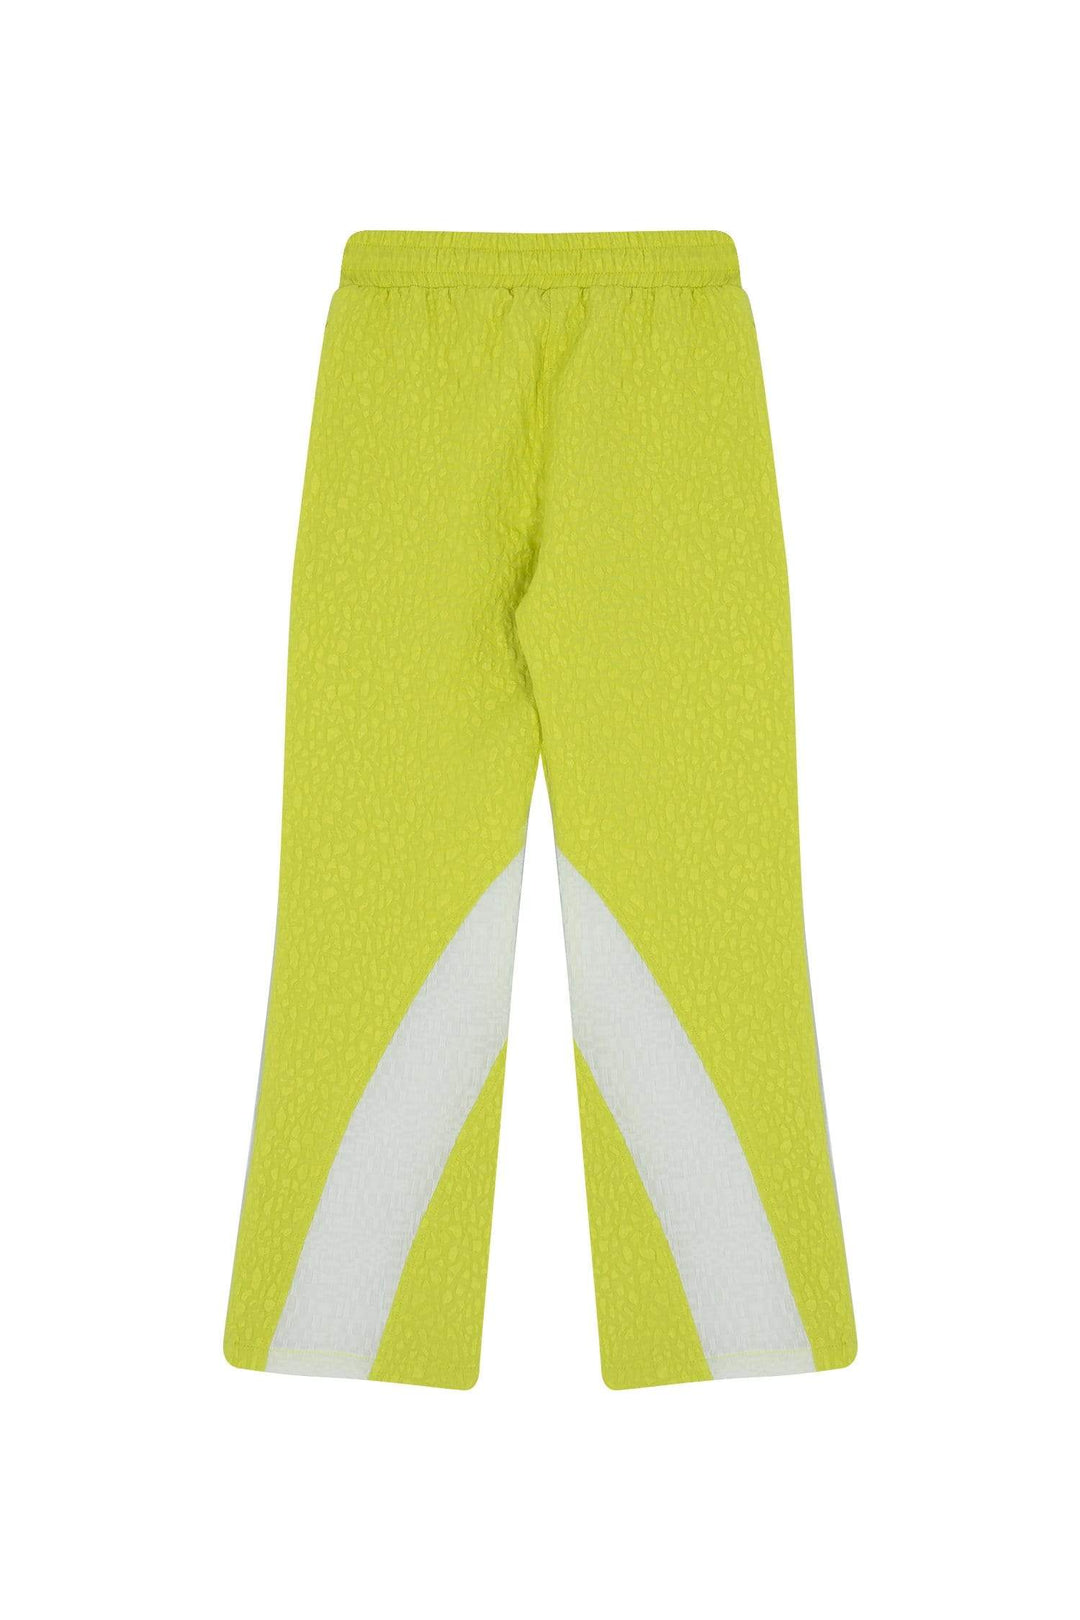 Kids Bright Lime Panelled Pants